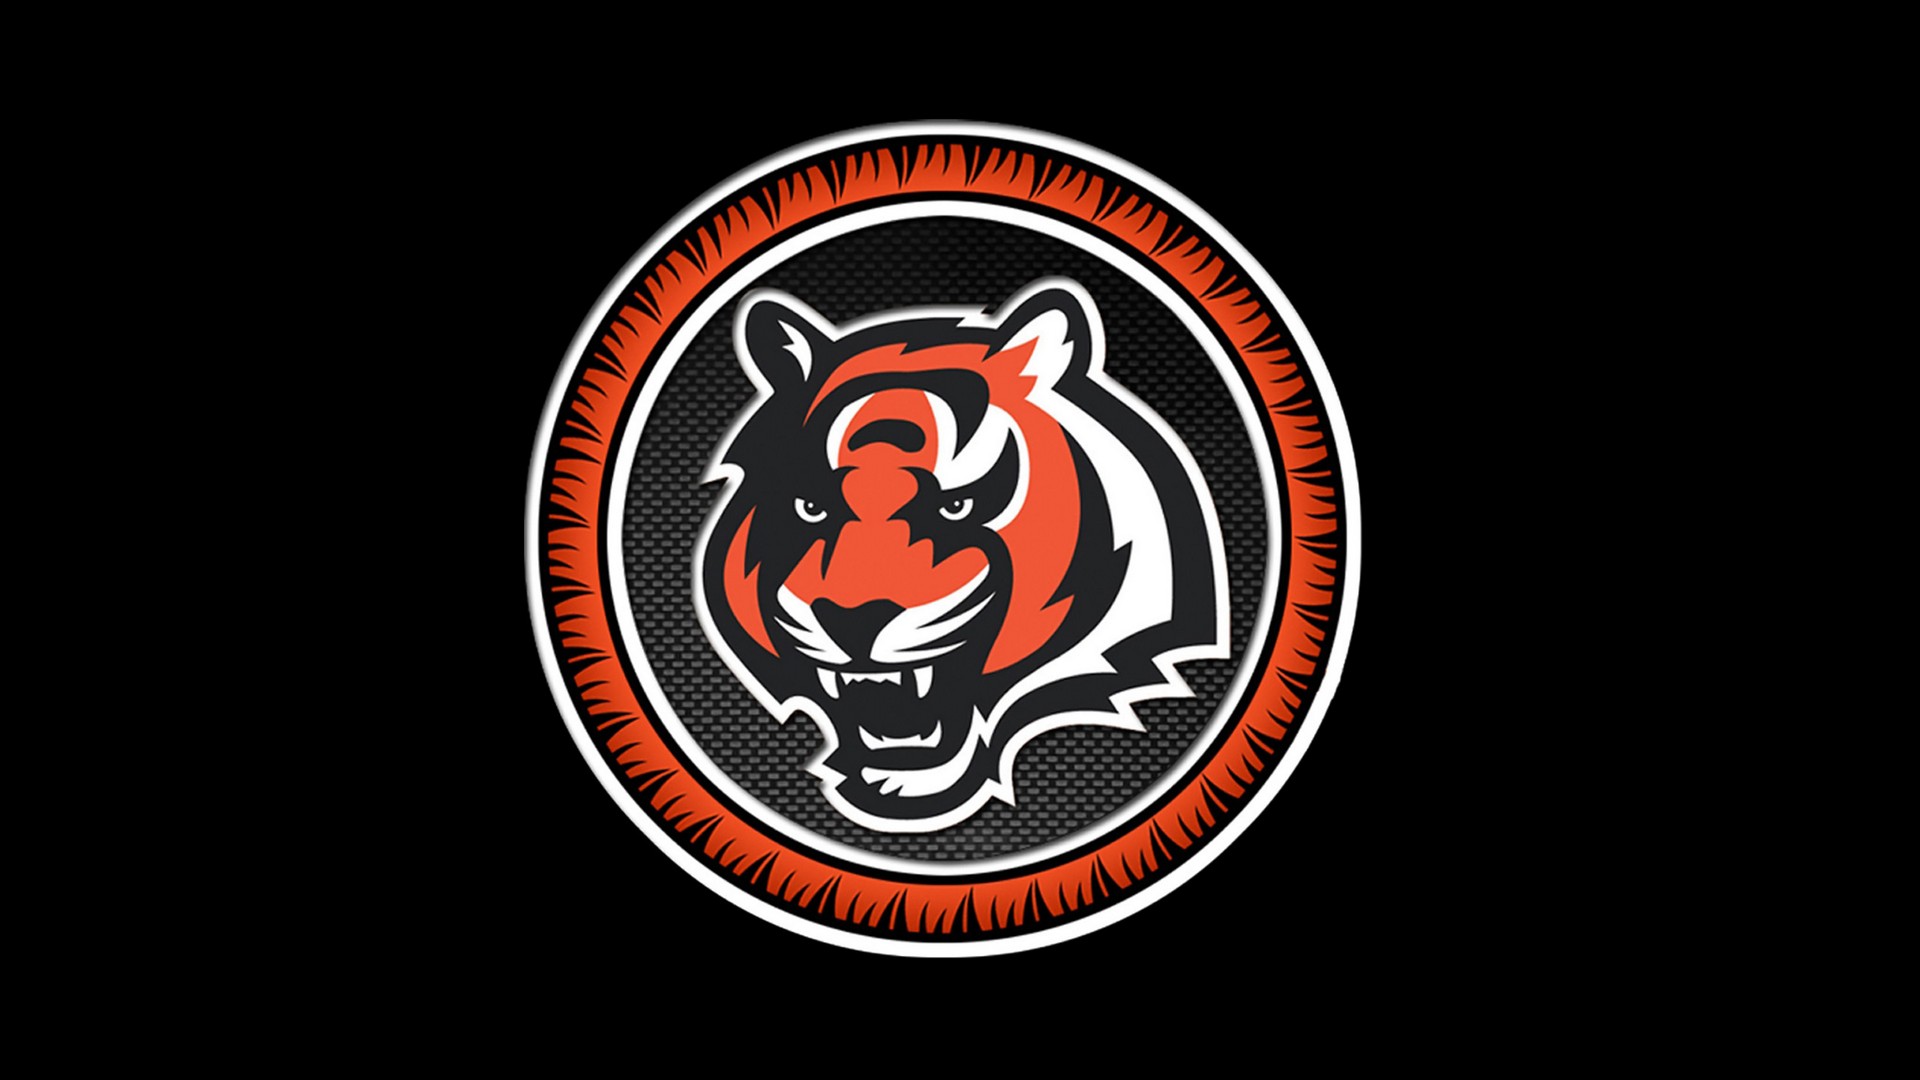 HD Backgrounds Cincinnati Bengals NFL With high-resolution 1920X1080 pixel. You can use this wallpaper for your Mac or Windows Desktop Background, iPhone, Android or Tablet and another Smartphone device